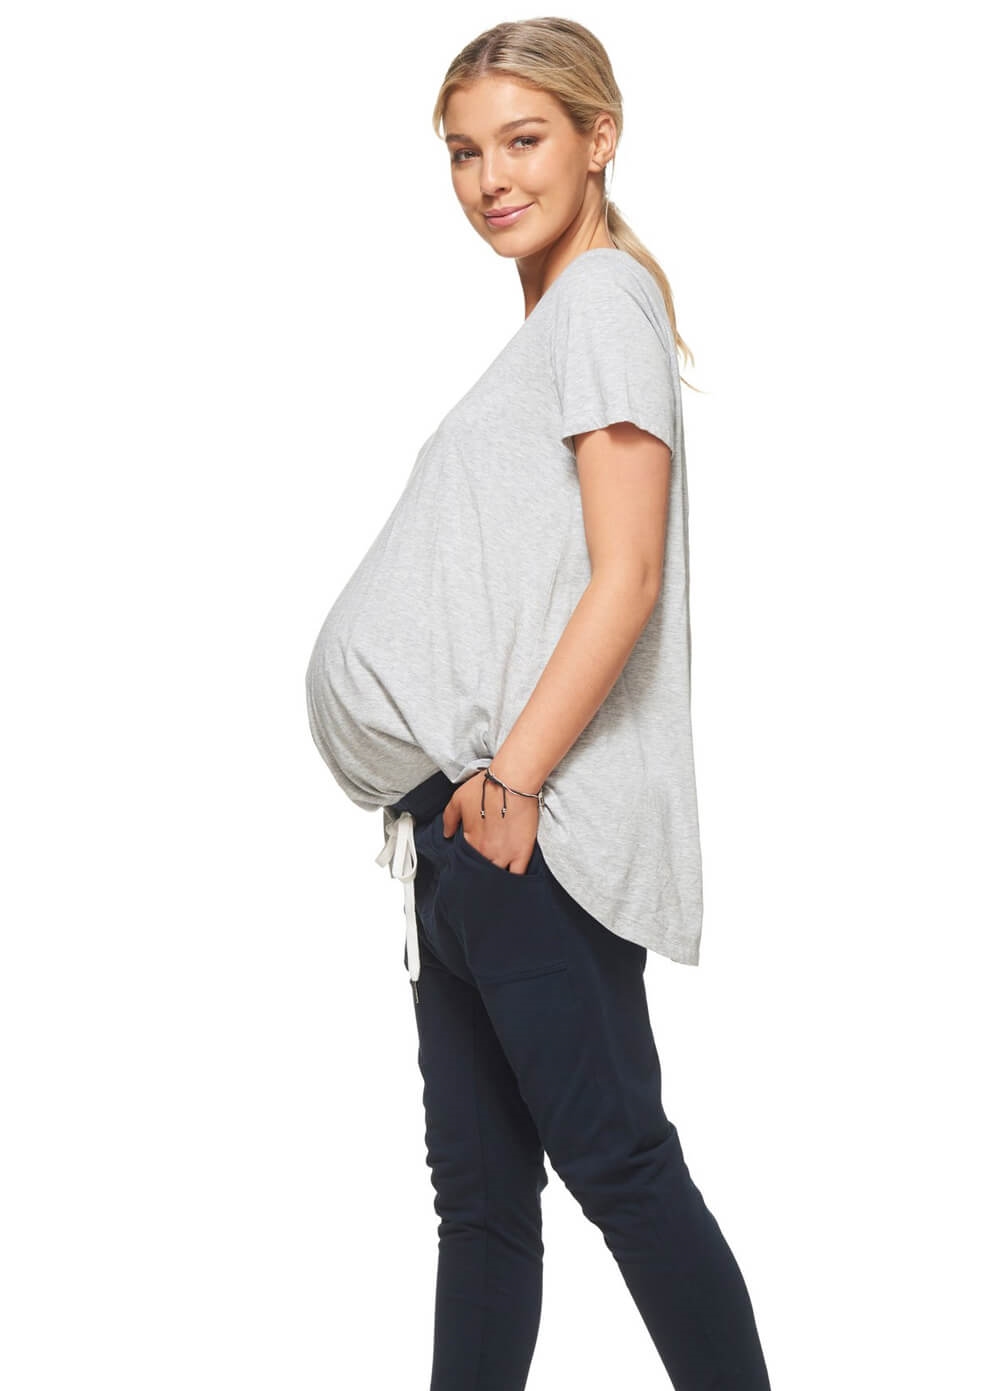 Bae - Remember When Maternity Jogger in Navy | Queen Bee